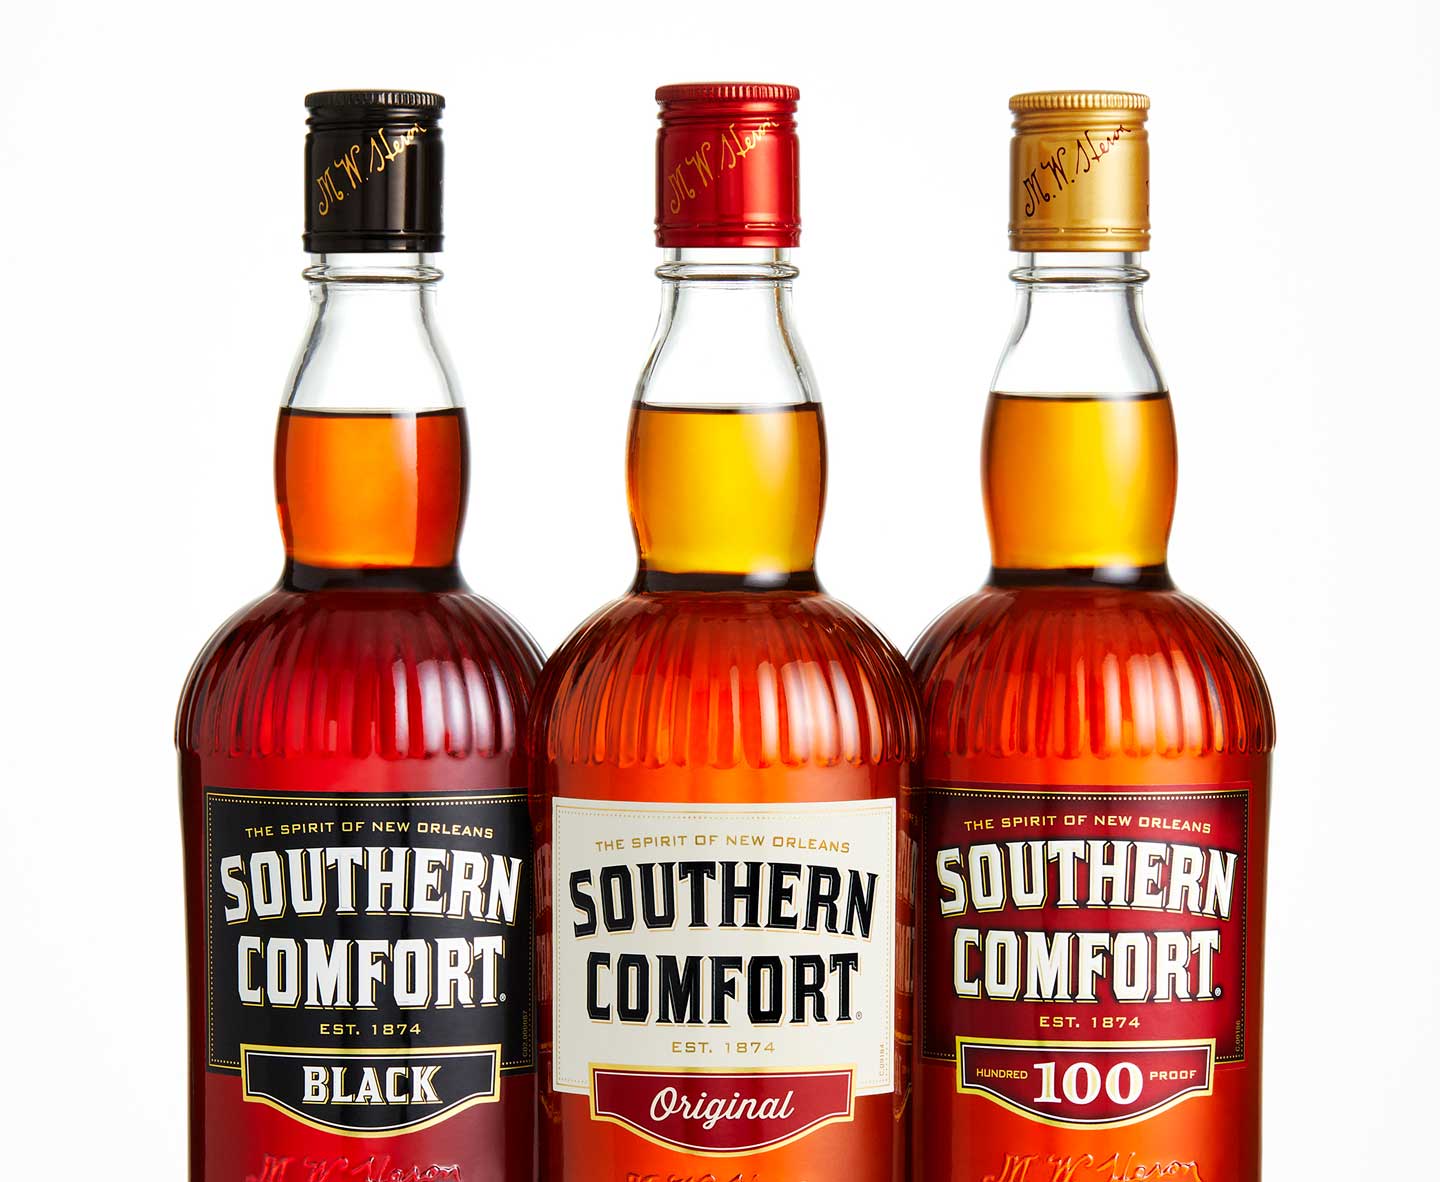 What is Southern Comfort Alcohol?